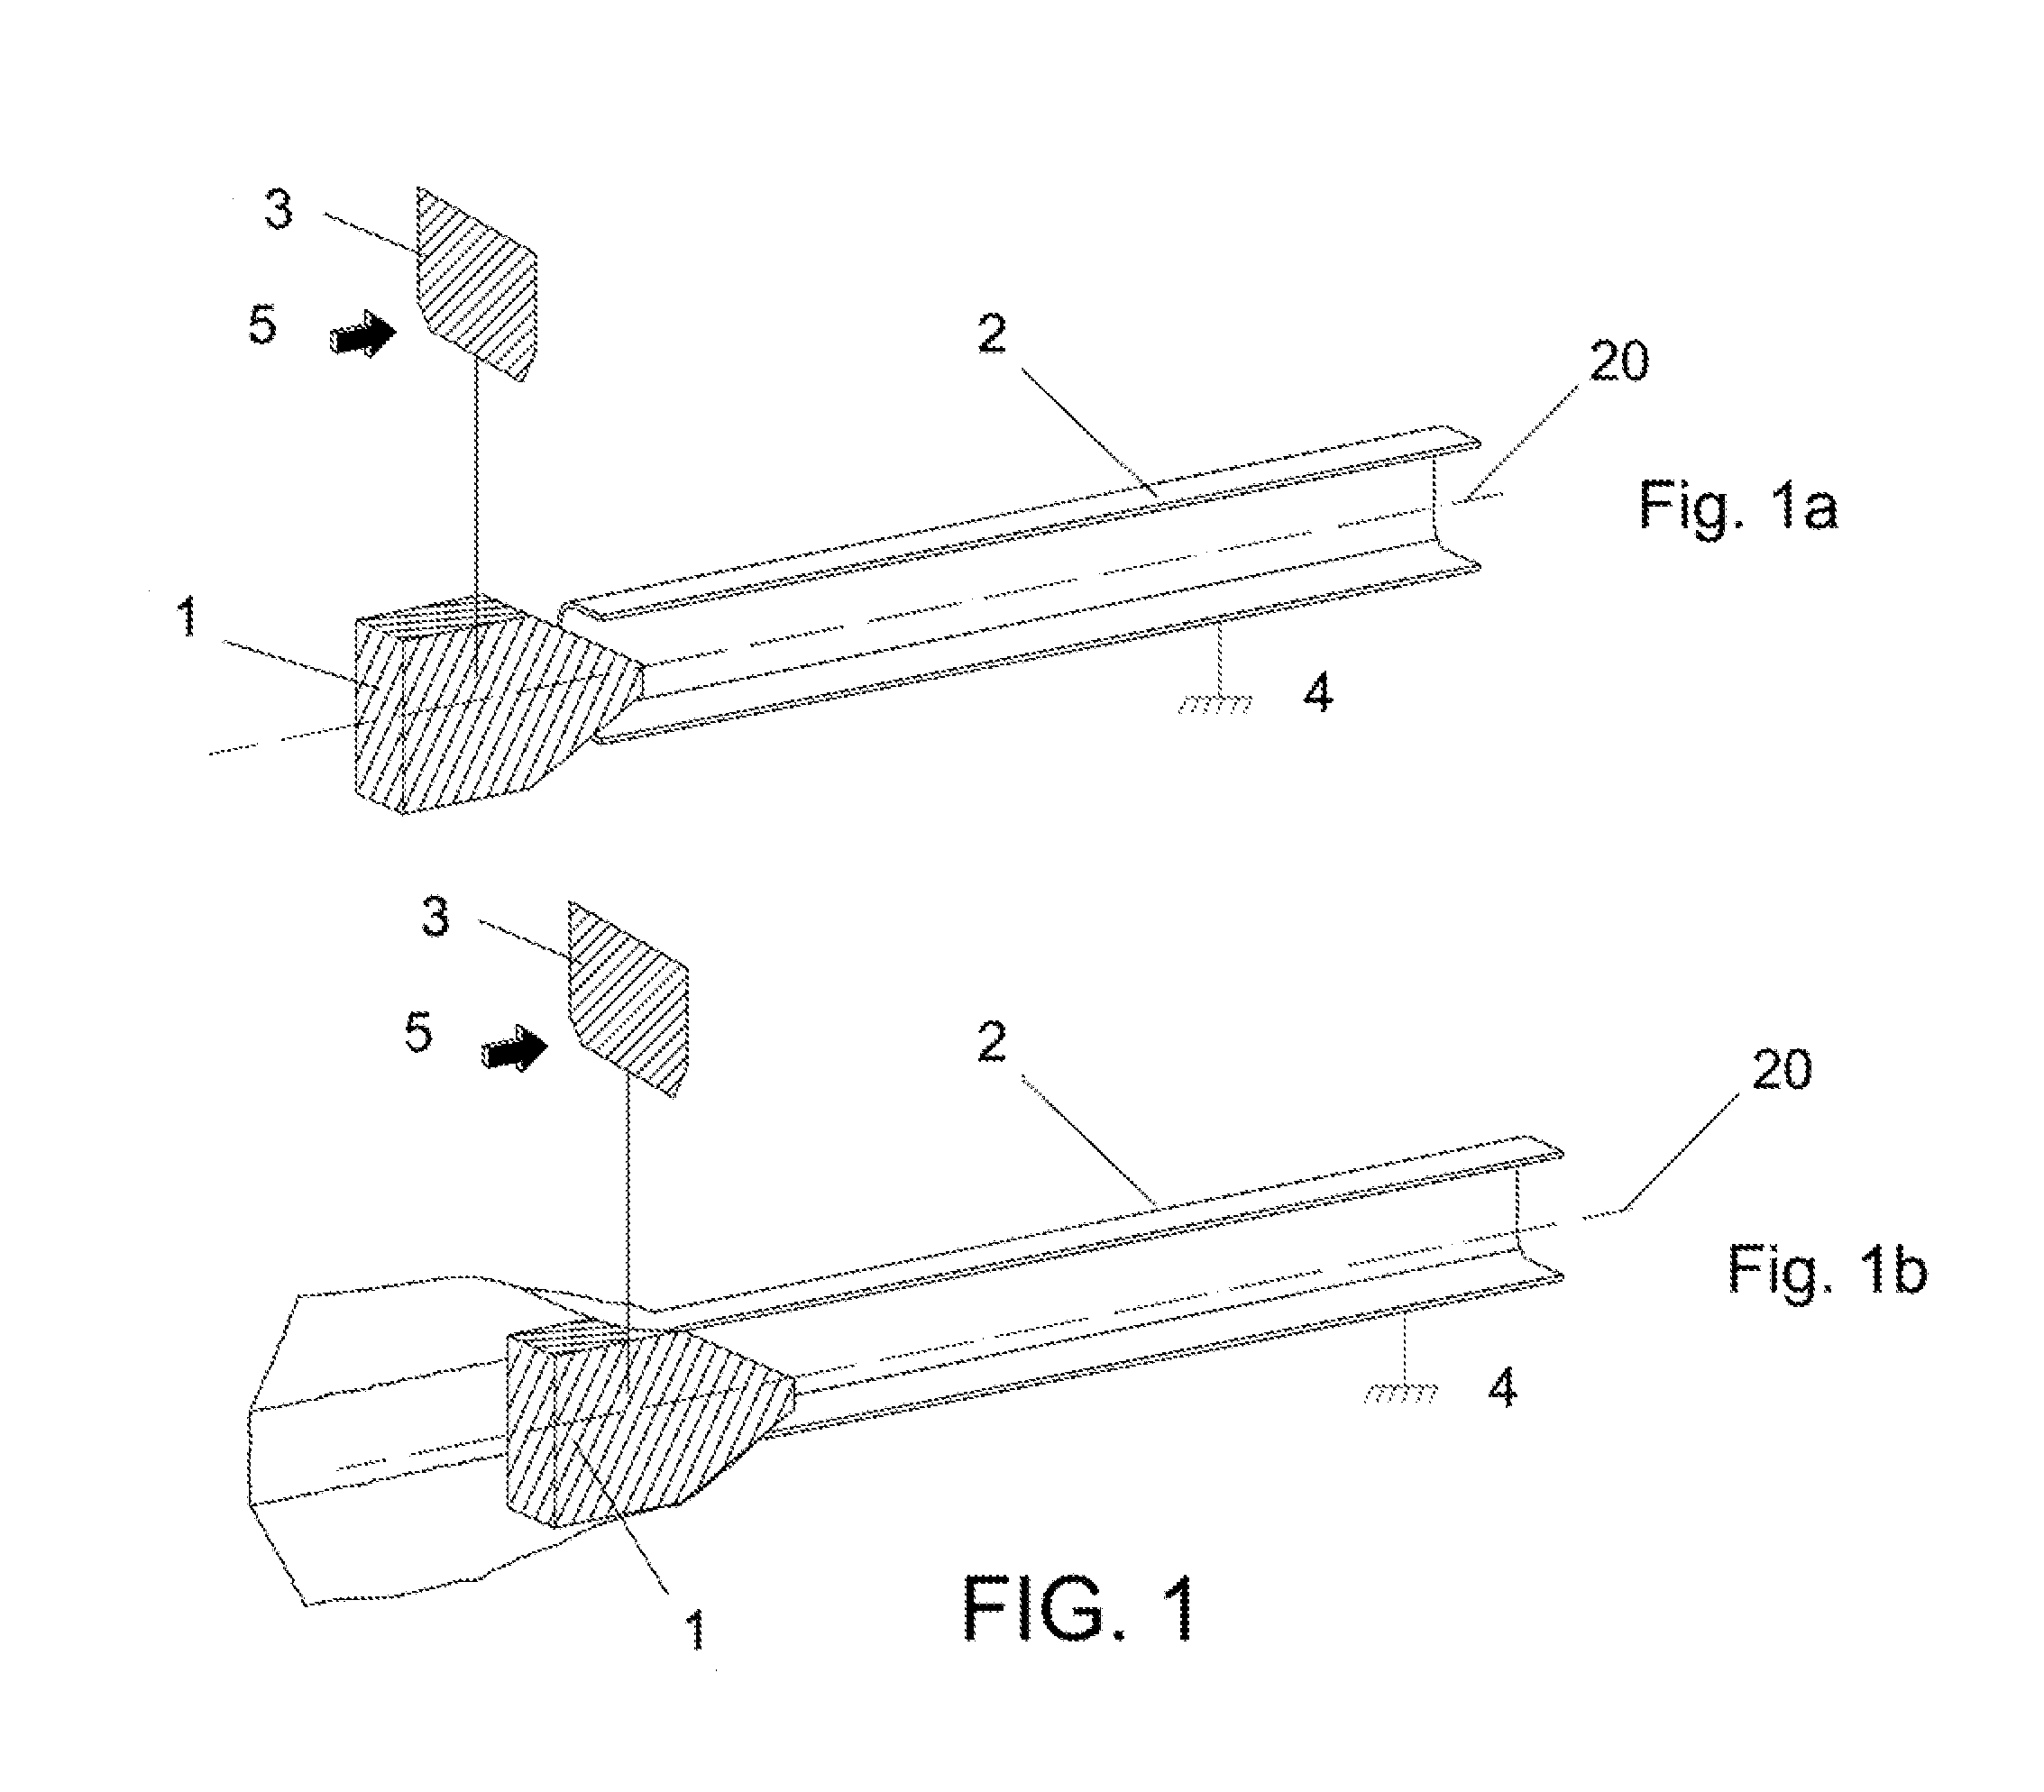 Mechanism for Absorbing Kinetic Energy from Frontal Impacts of Vehicles Against Vehicle Restraining Systems, for Using on the Edges and Central Reservations of Roadways, Such as Shock Absorbers and Barrier Ends